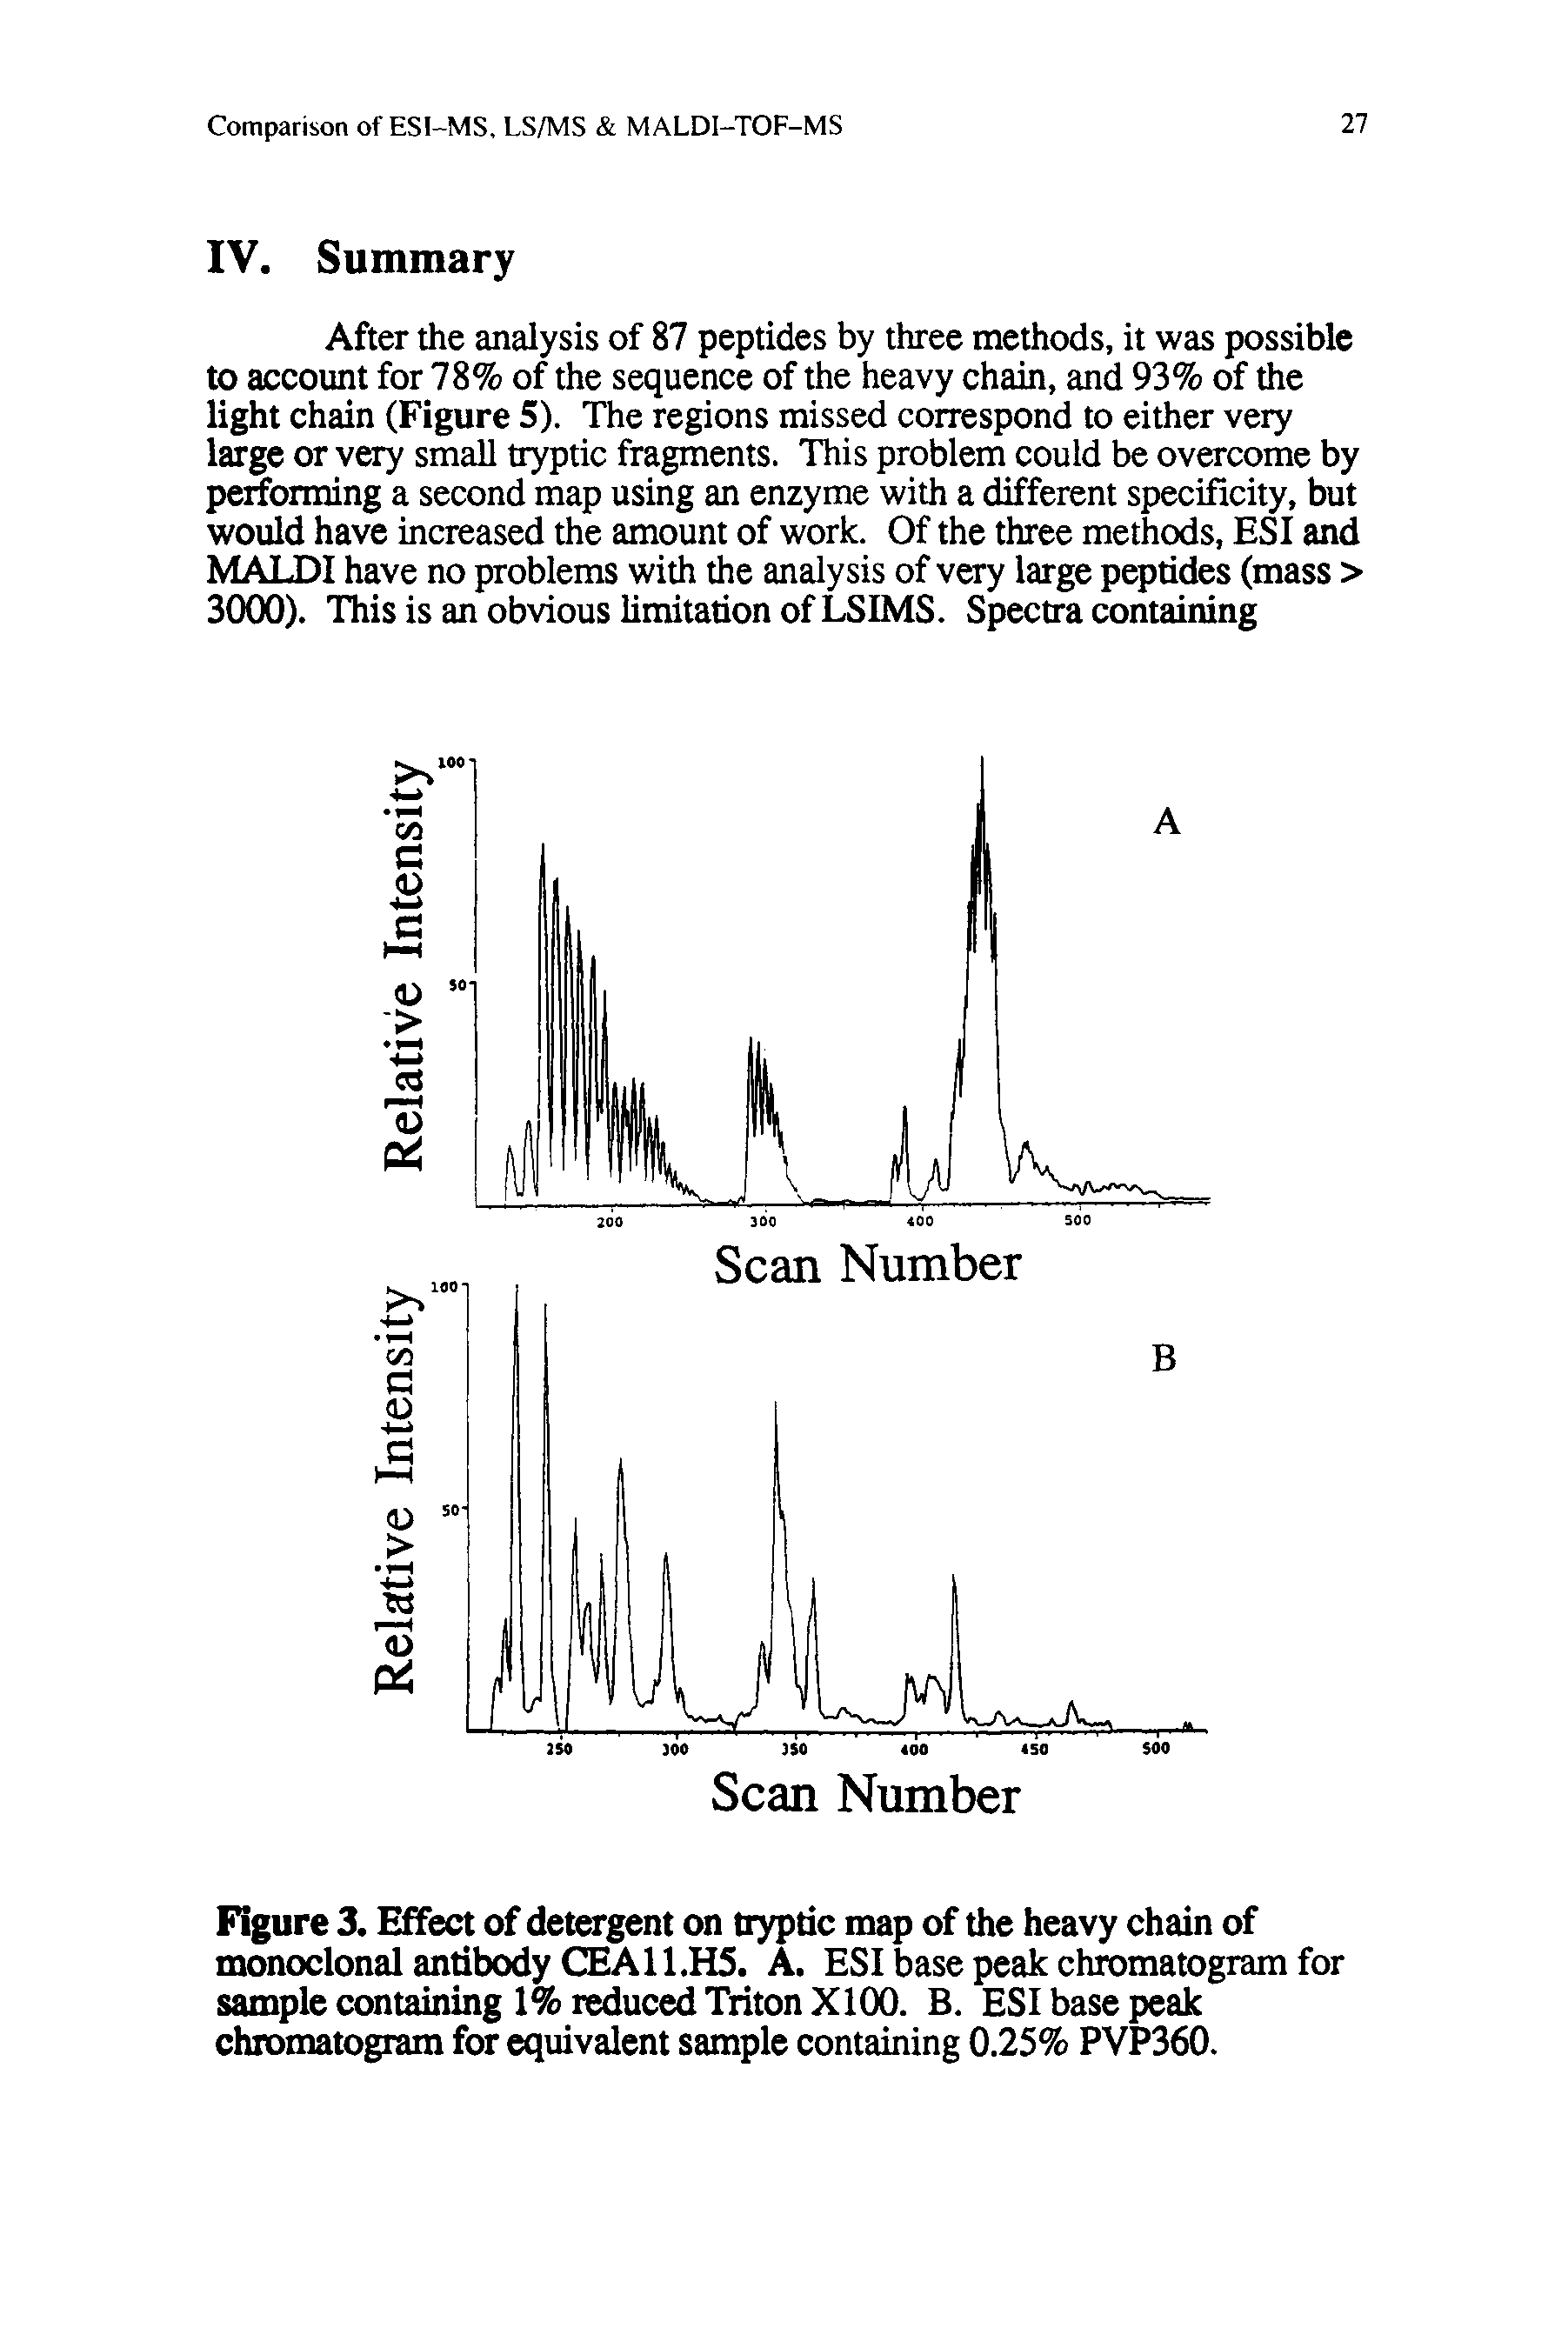 Figure 3. Effect of detergent on tryptic map of the heavy chain of monoclonal antibody CEA11.H5. A. ESI base peak chromatogram for sample containing 1% reduced Triton X1(X). B. ESI base peak chromatogram for equivalent sample containing 0.25% PVP360.